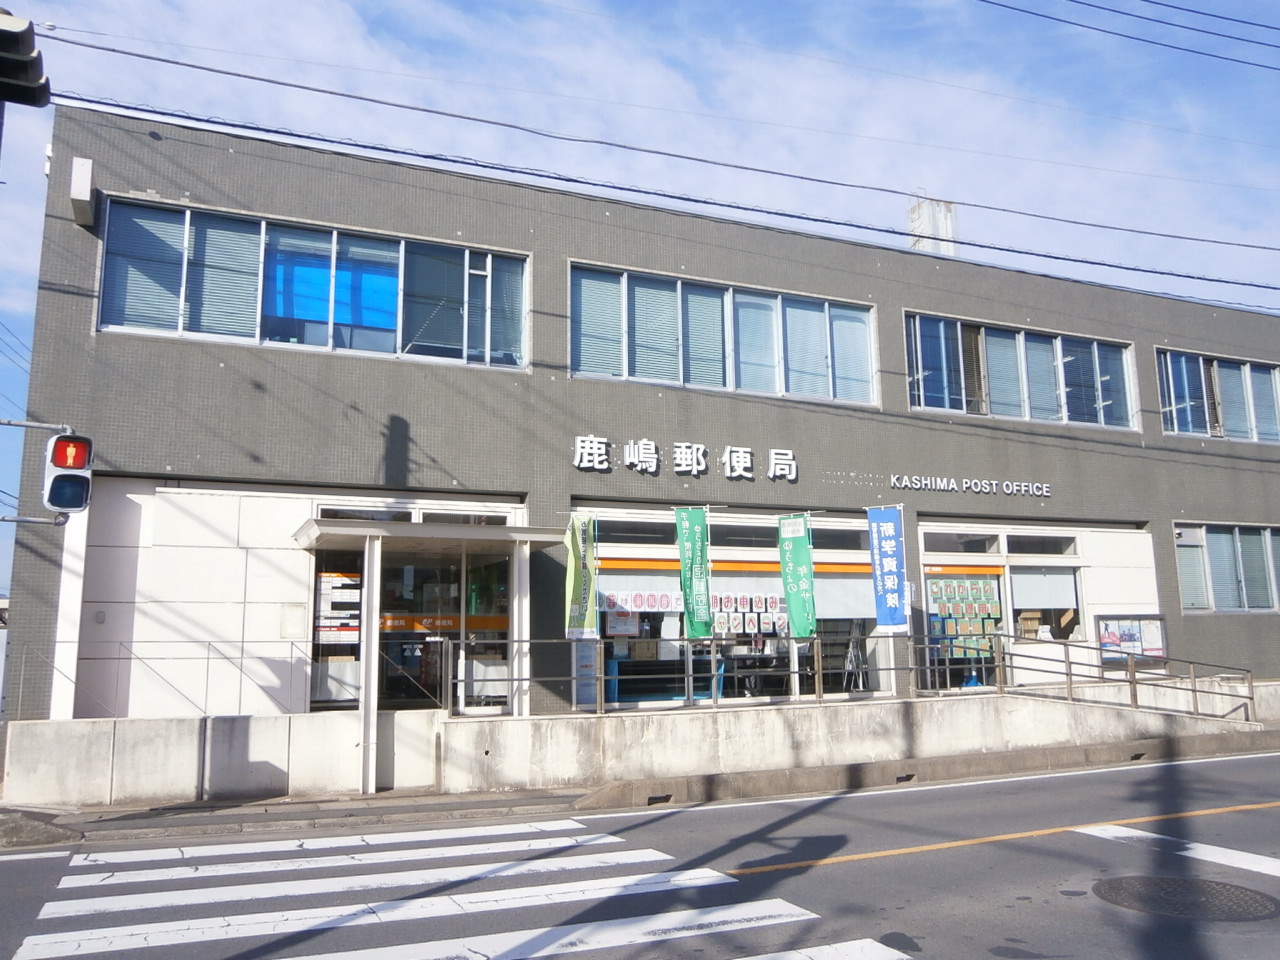 post office. Kashima 2605m until the post office (post office)